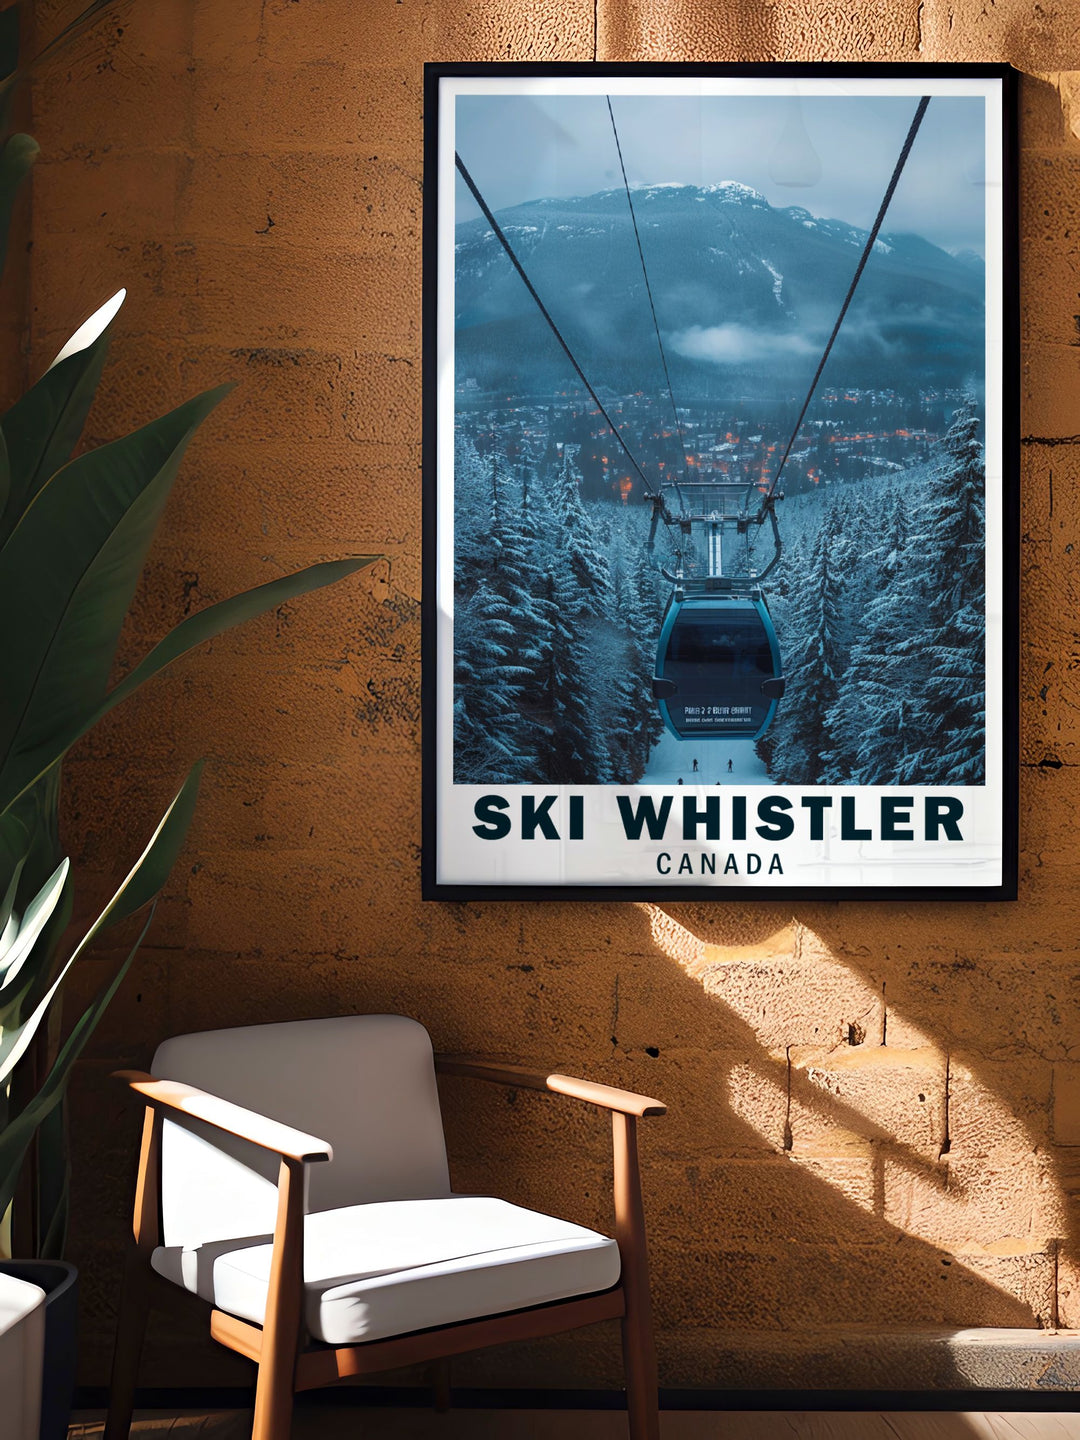 Bring the beauty of Whistler into your home with this detailed poster, highlighting the excitement of the slopes and the serene landscape seen from the Peak 2 Peak Gondola.